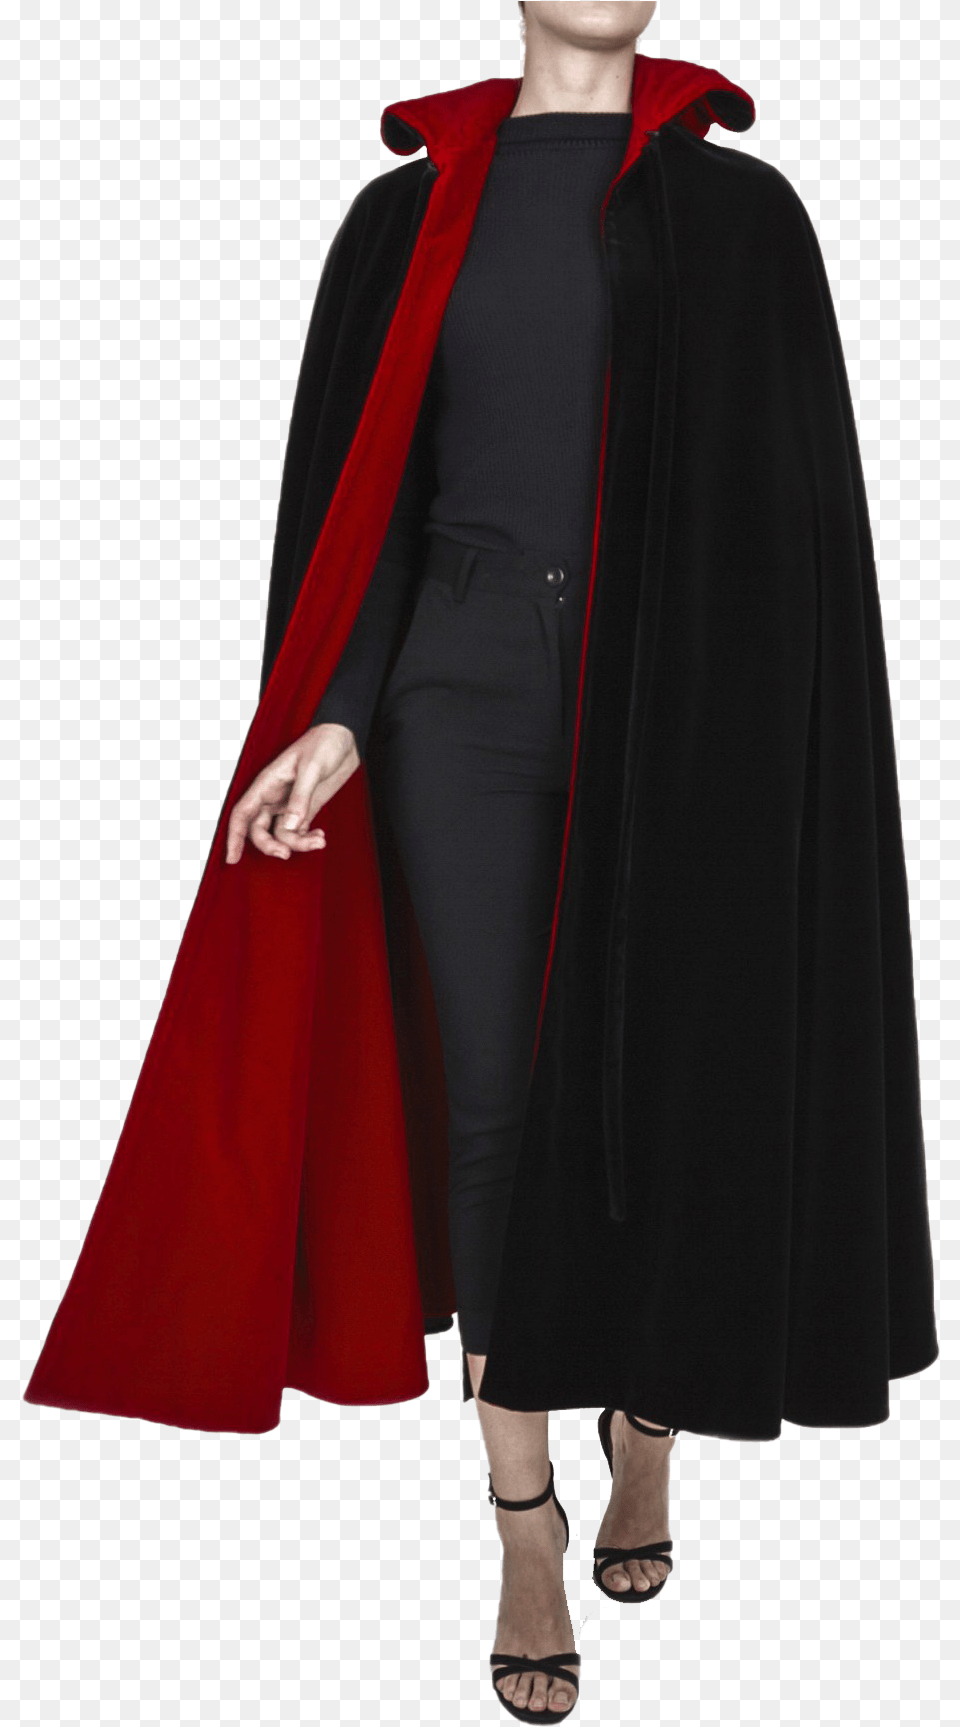 Cape File Download Cape, Clothing, Fashion, Coat, Overcoat Png Image